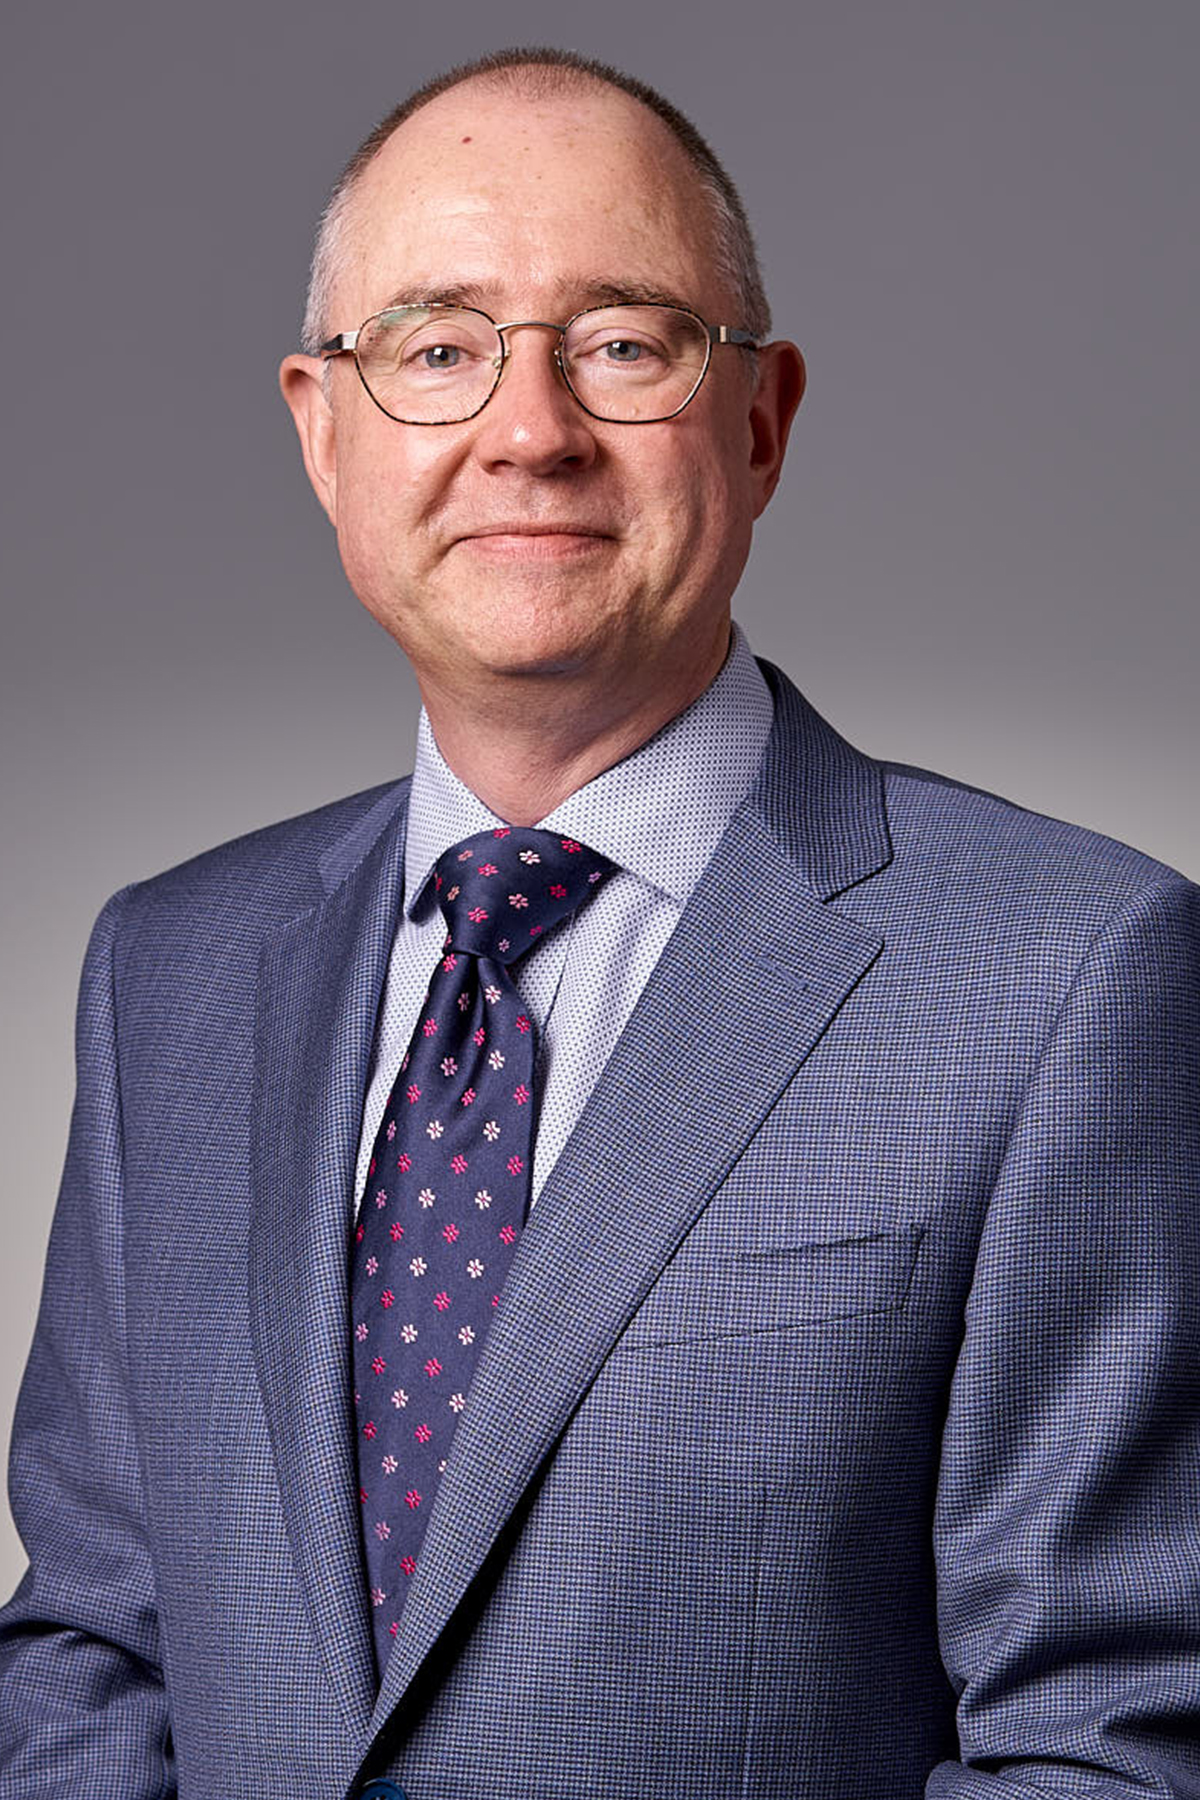 Mark de Raad is a man in his fifties with short dark hair, round glasses and is wearing a grey suit.